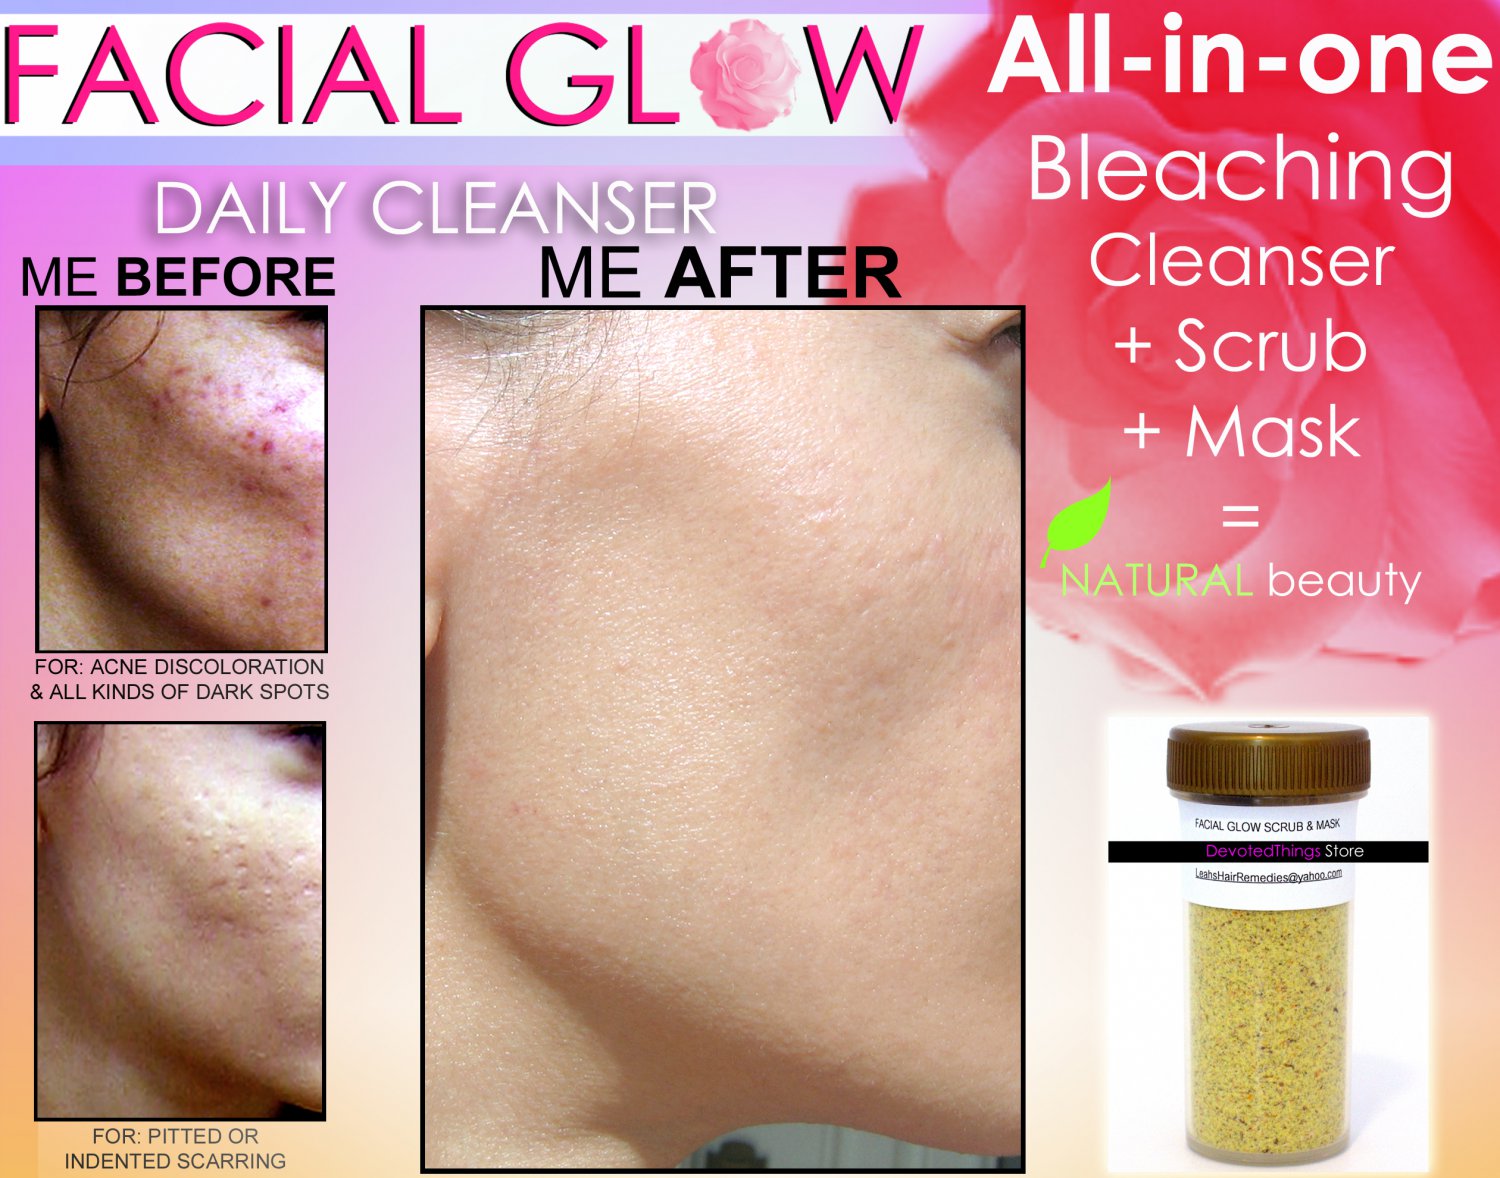 Facial Glow Scrub And Mask Daily Cleanser Acne Scars Skin Bleaching Soap